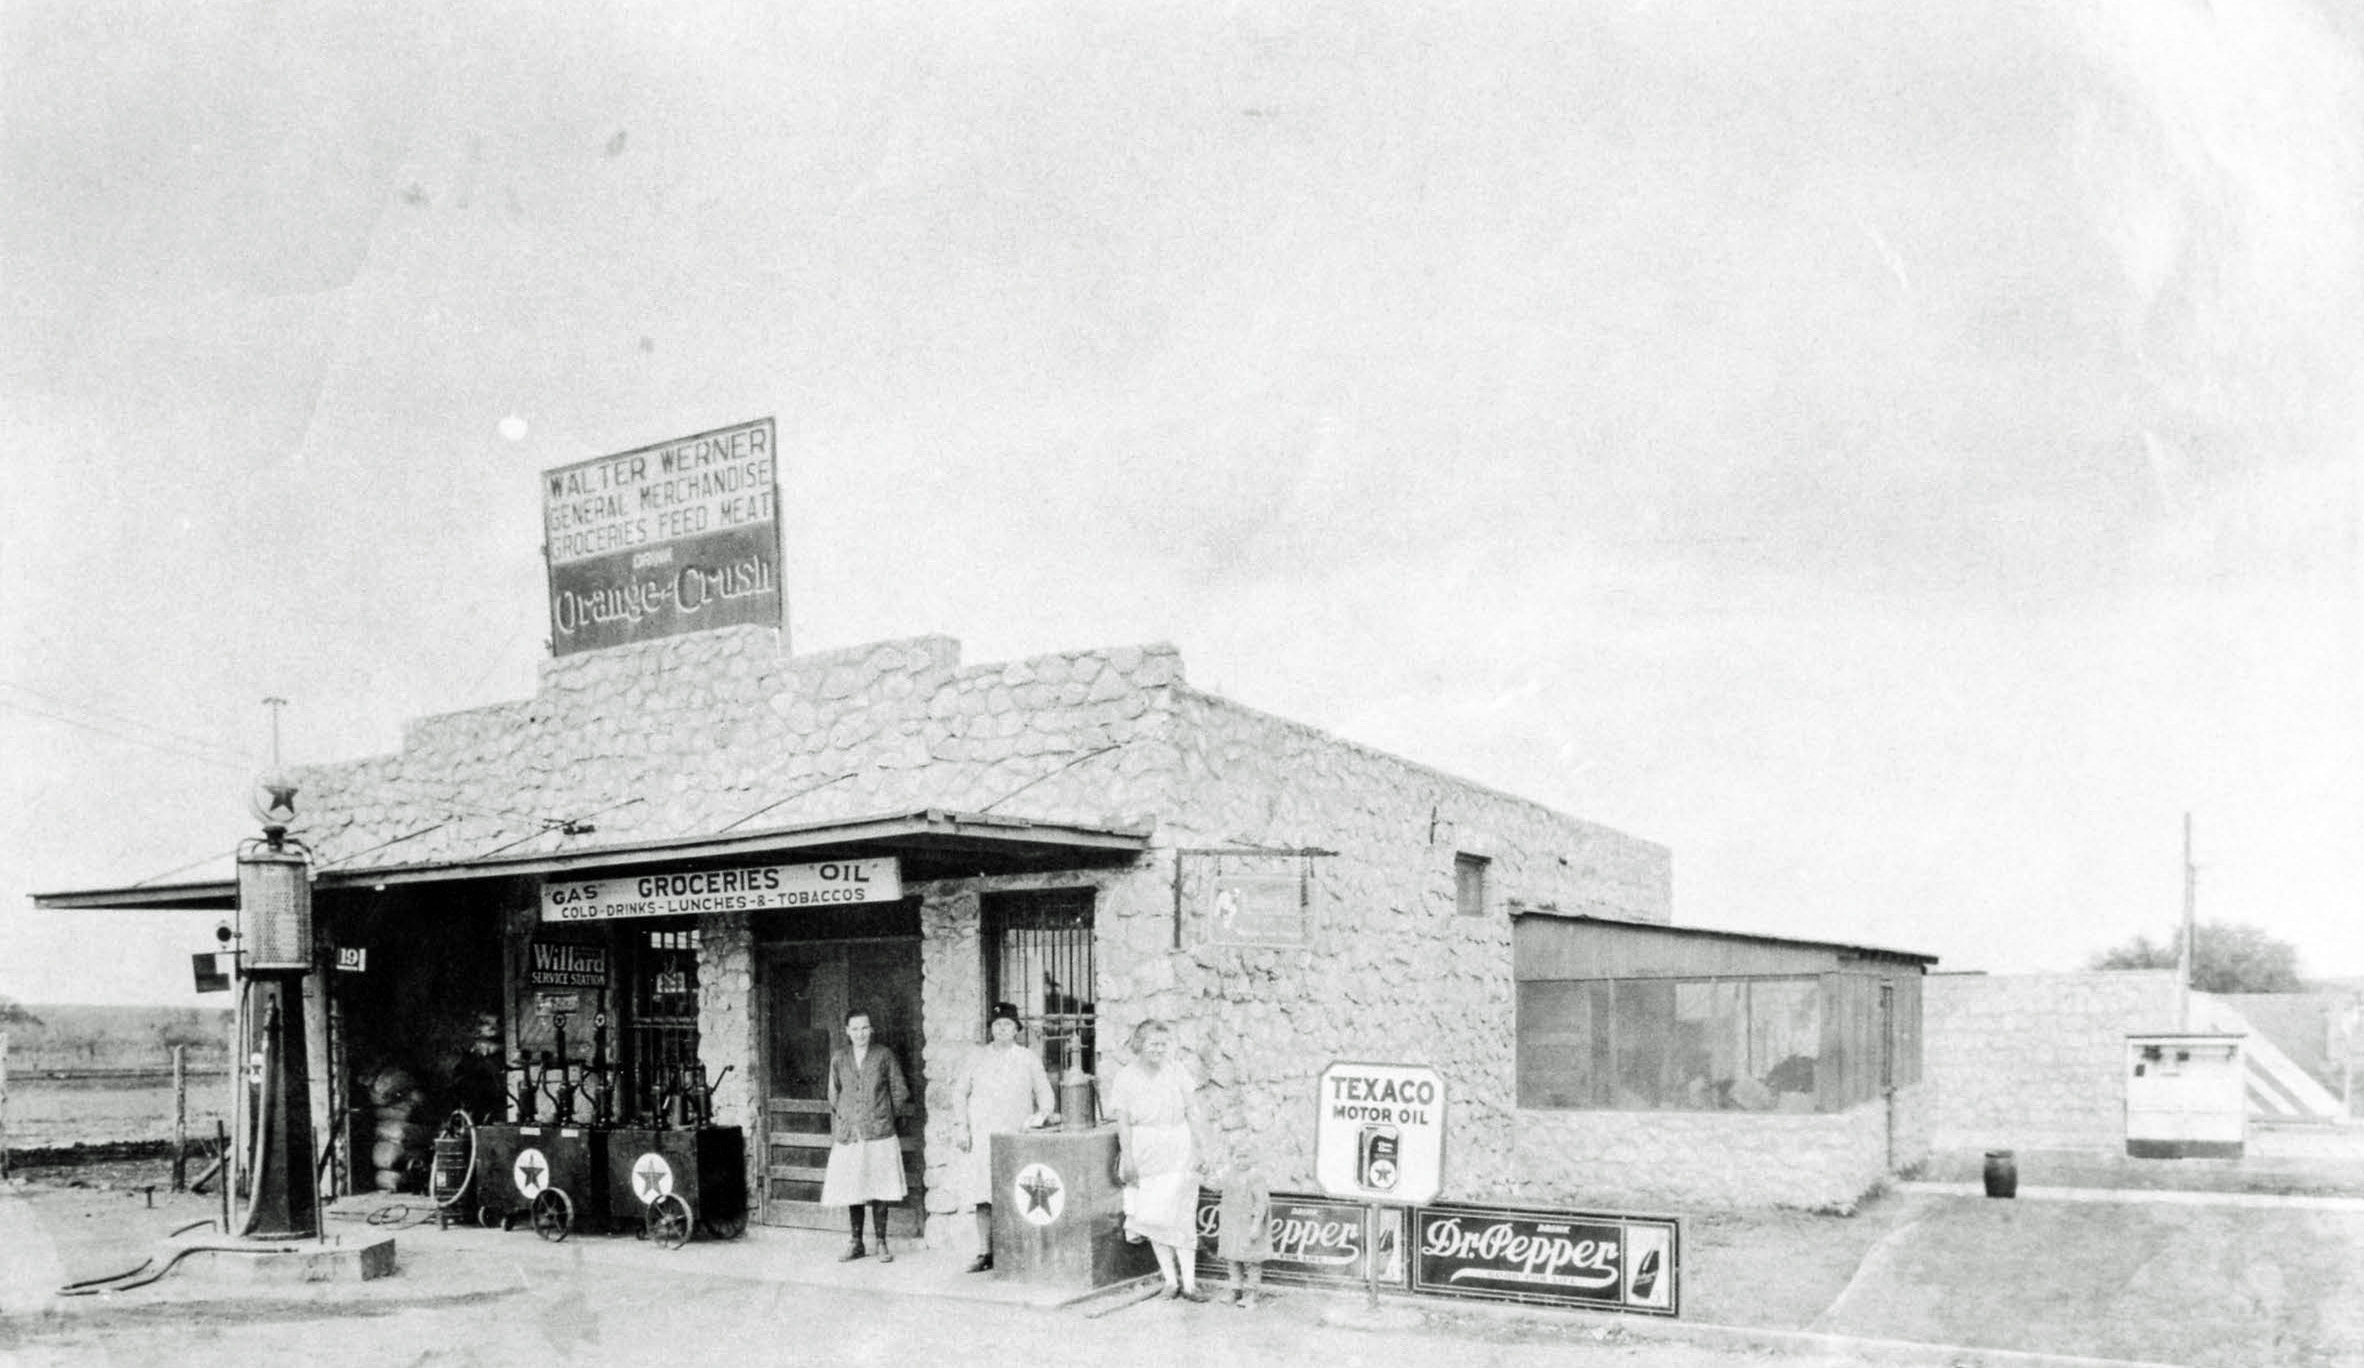 Werner Store - circa 1930 (became Gerfers 
      Store in 1946)